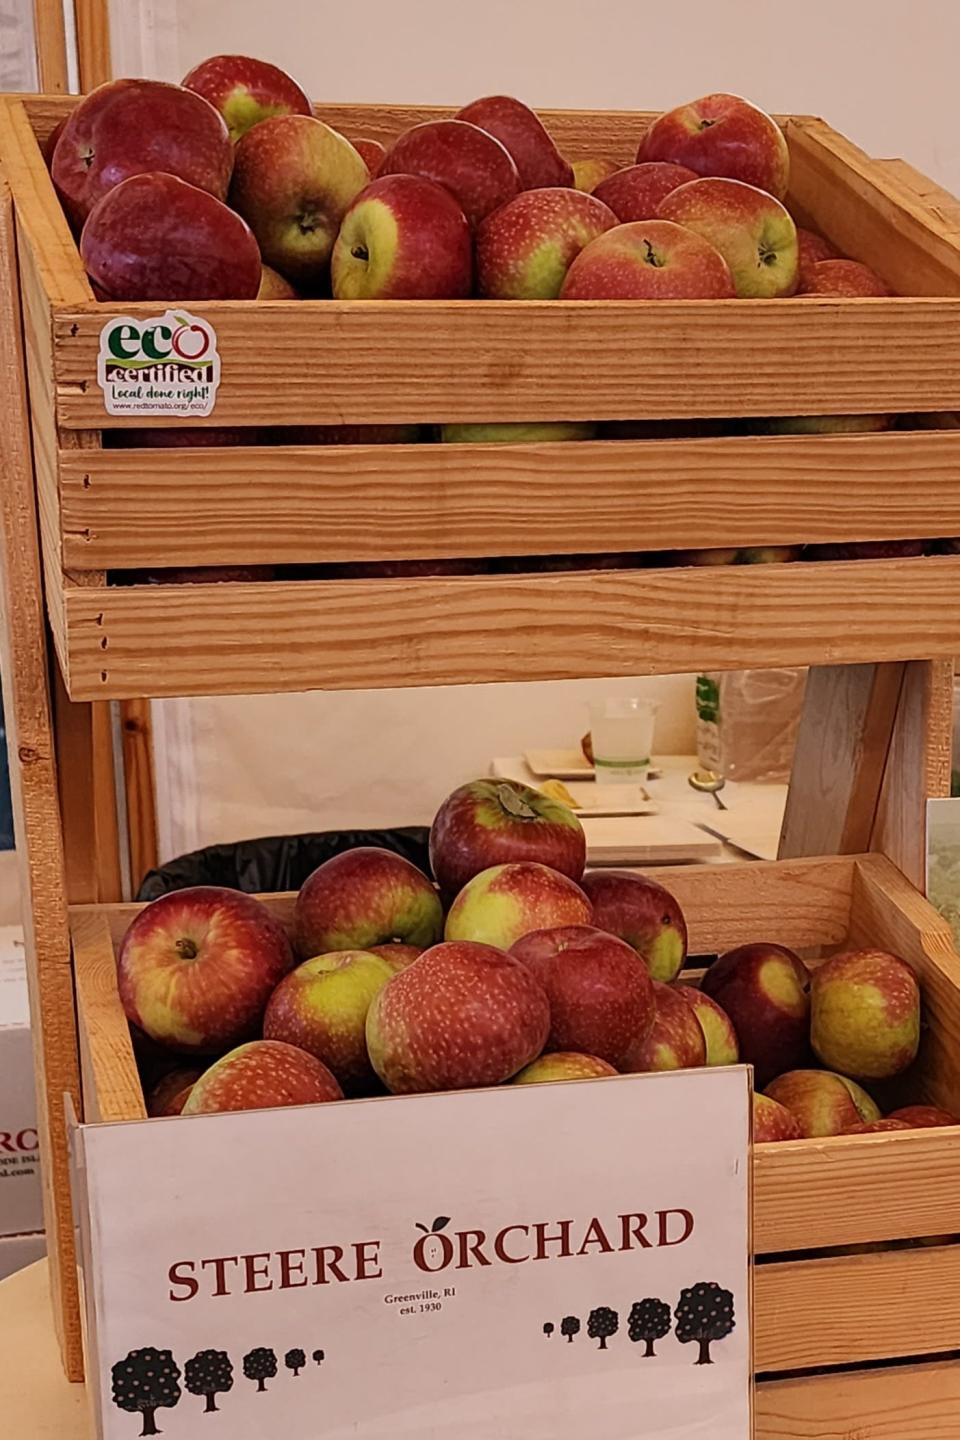 Steere Orchards, an apple grower, is among Farm Fresh R.I.'s contributors.